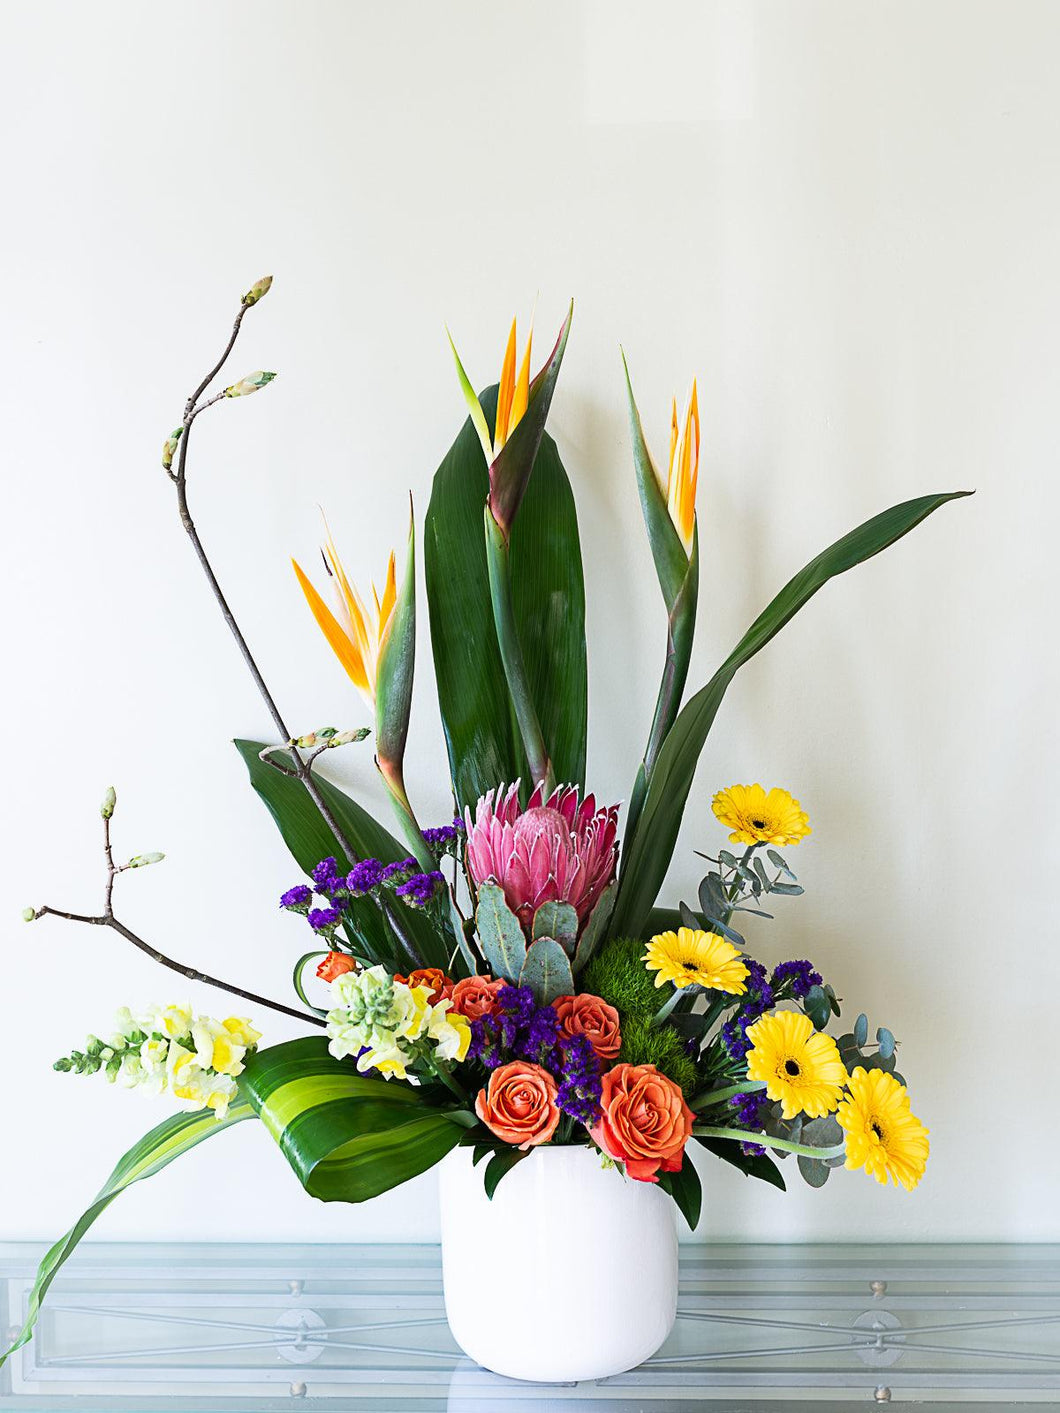 You're my world - Four Seasons Floristry